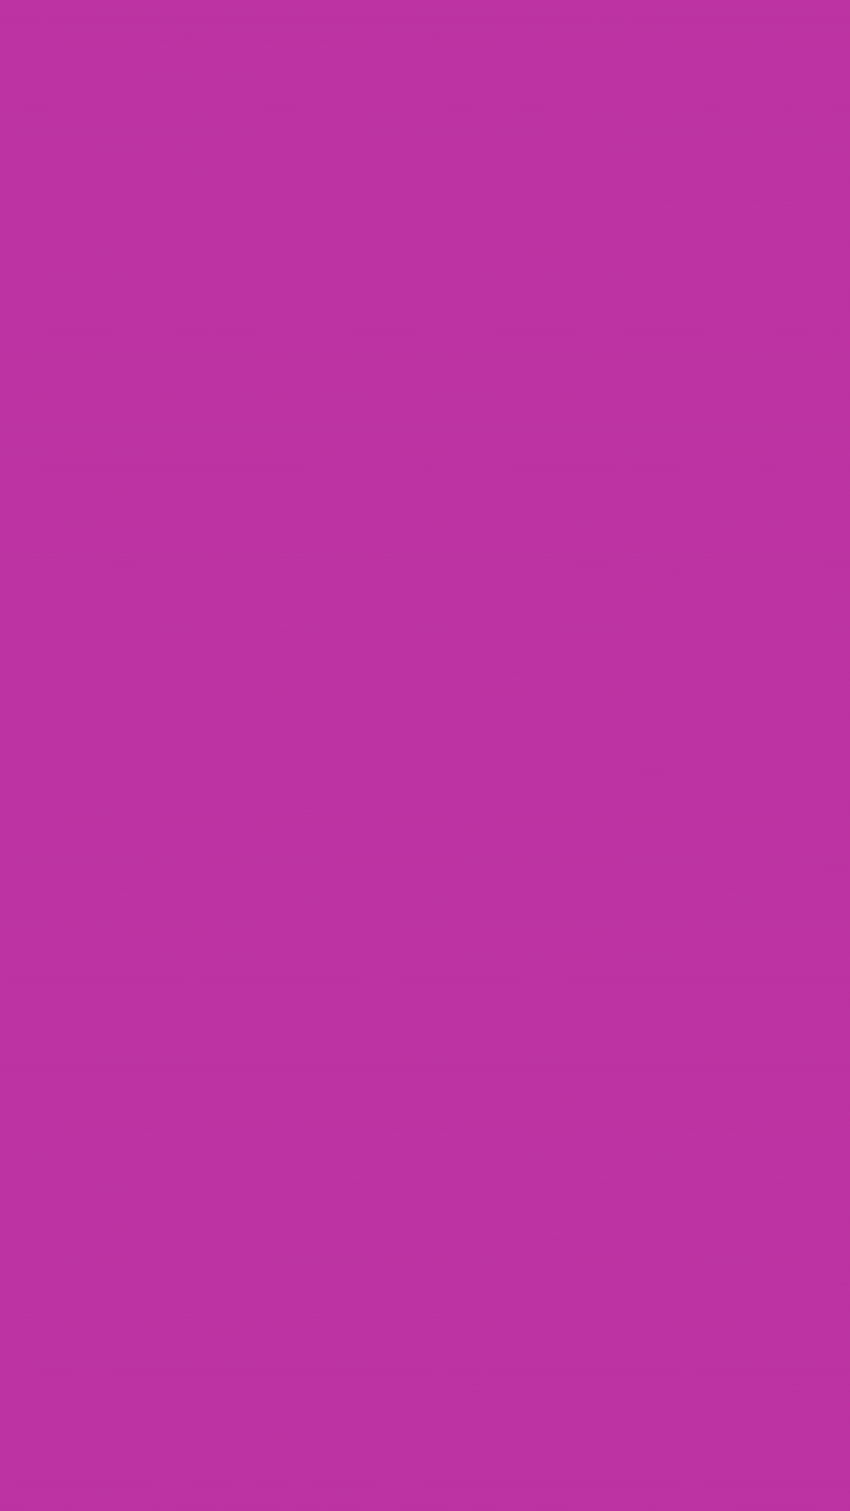 Byzantine Solid Color Background .teahub.io, Solid Pink Color HD phone wallpaper